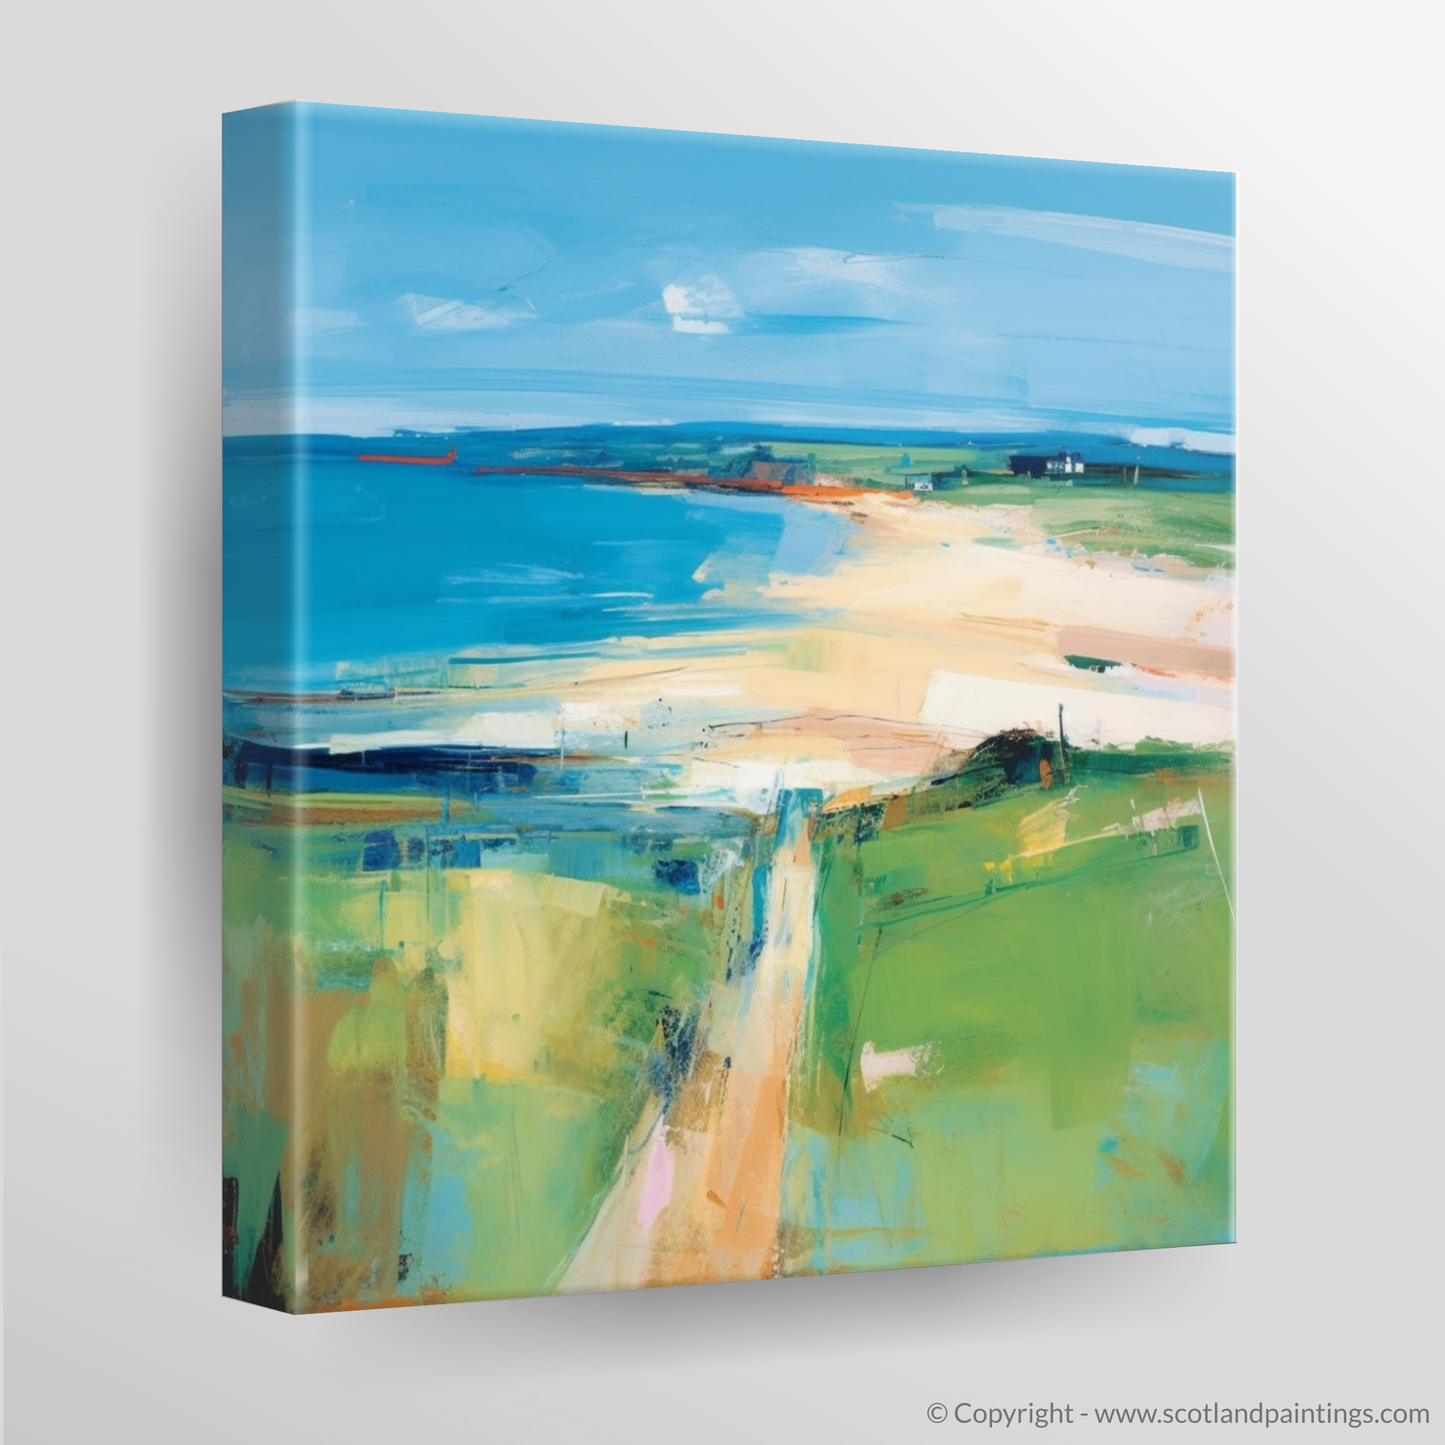 Dancing Waves and Vibrant Shores: An Abstract Impression of Gullane Beach